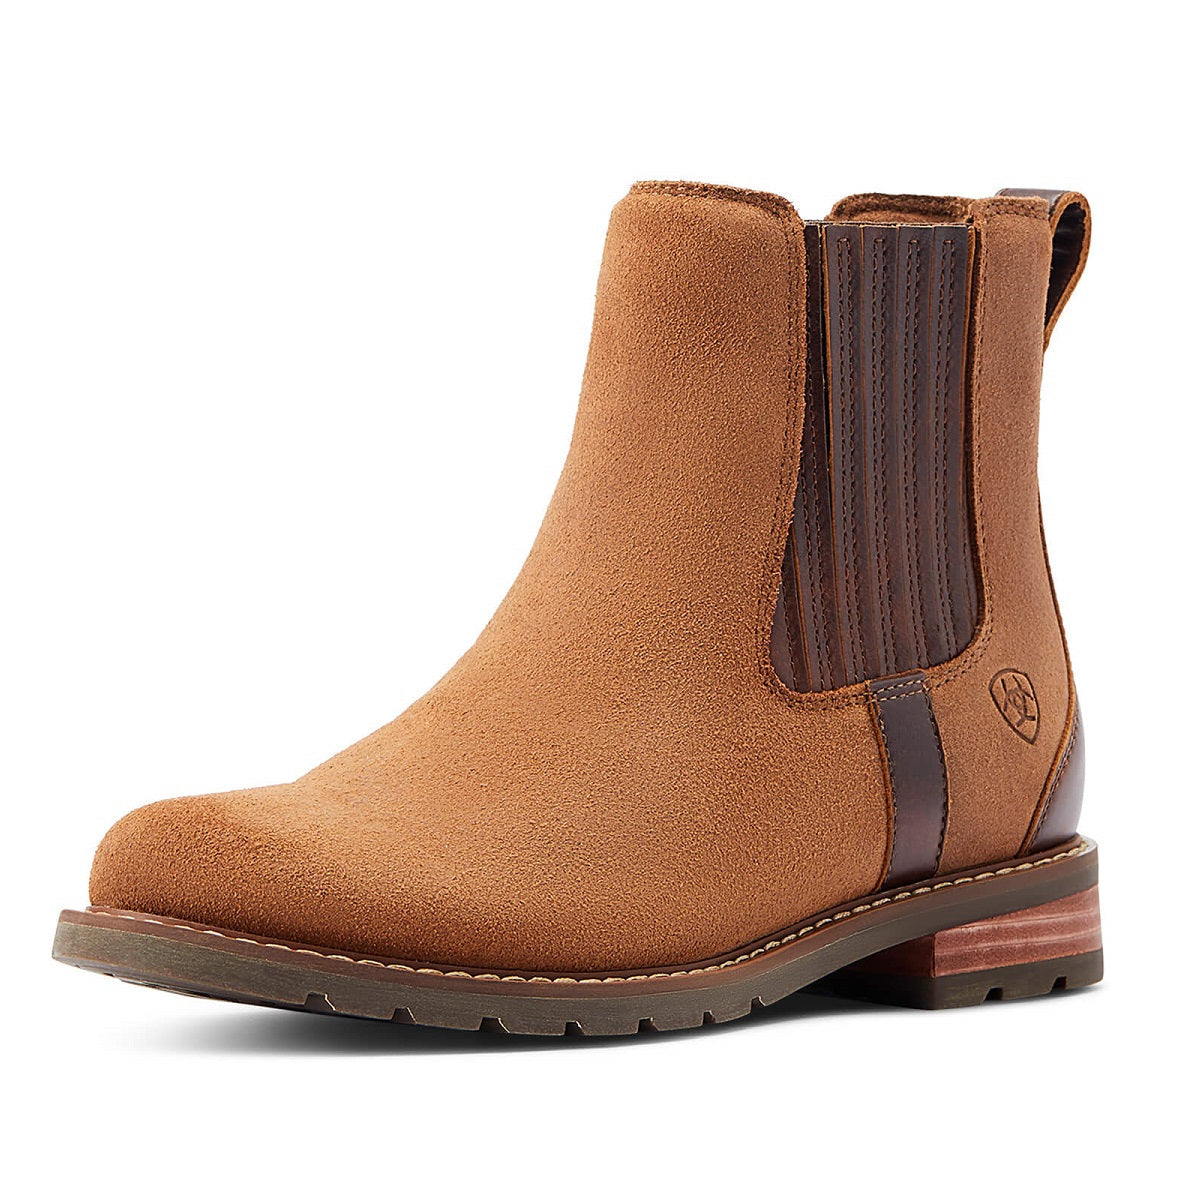 40% OFF - ARIAT Wexford H2O Waterproof Chelsea Boots - Womens - Saddle Suede - Sizes: UK 5.5